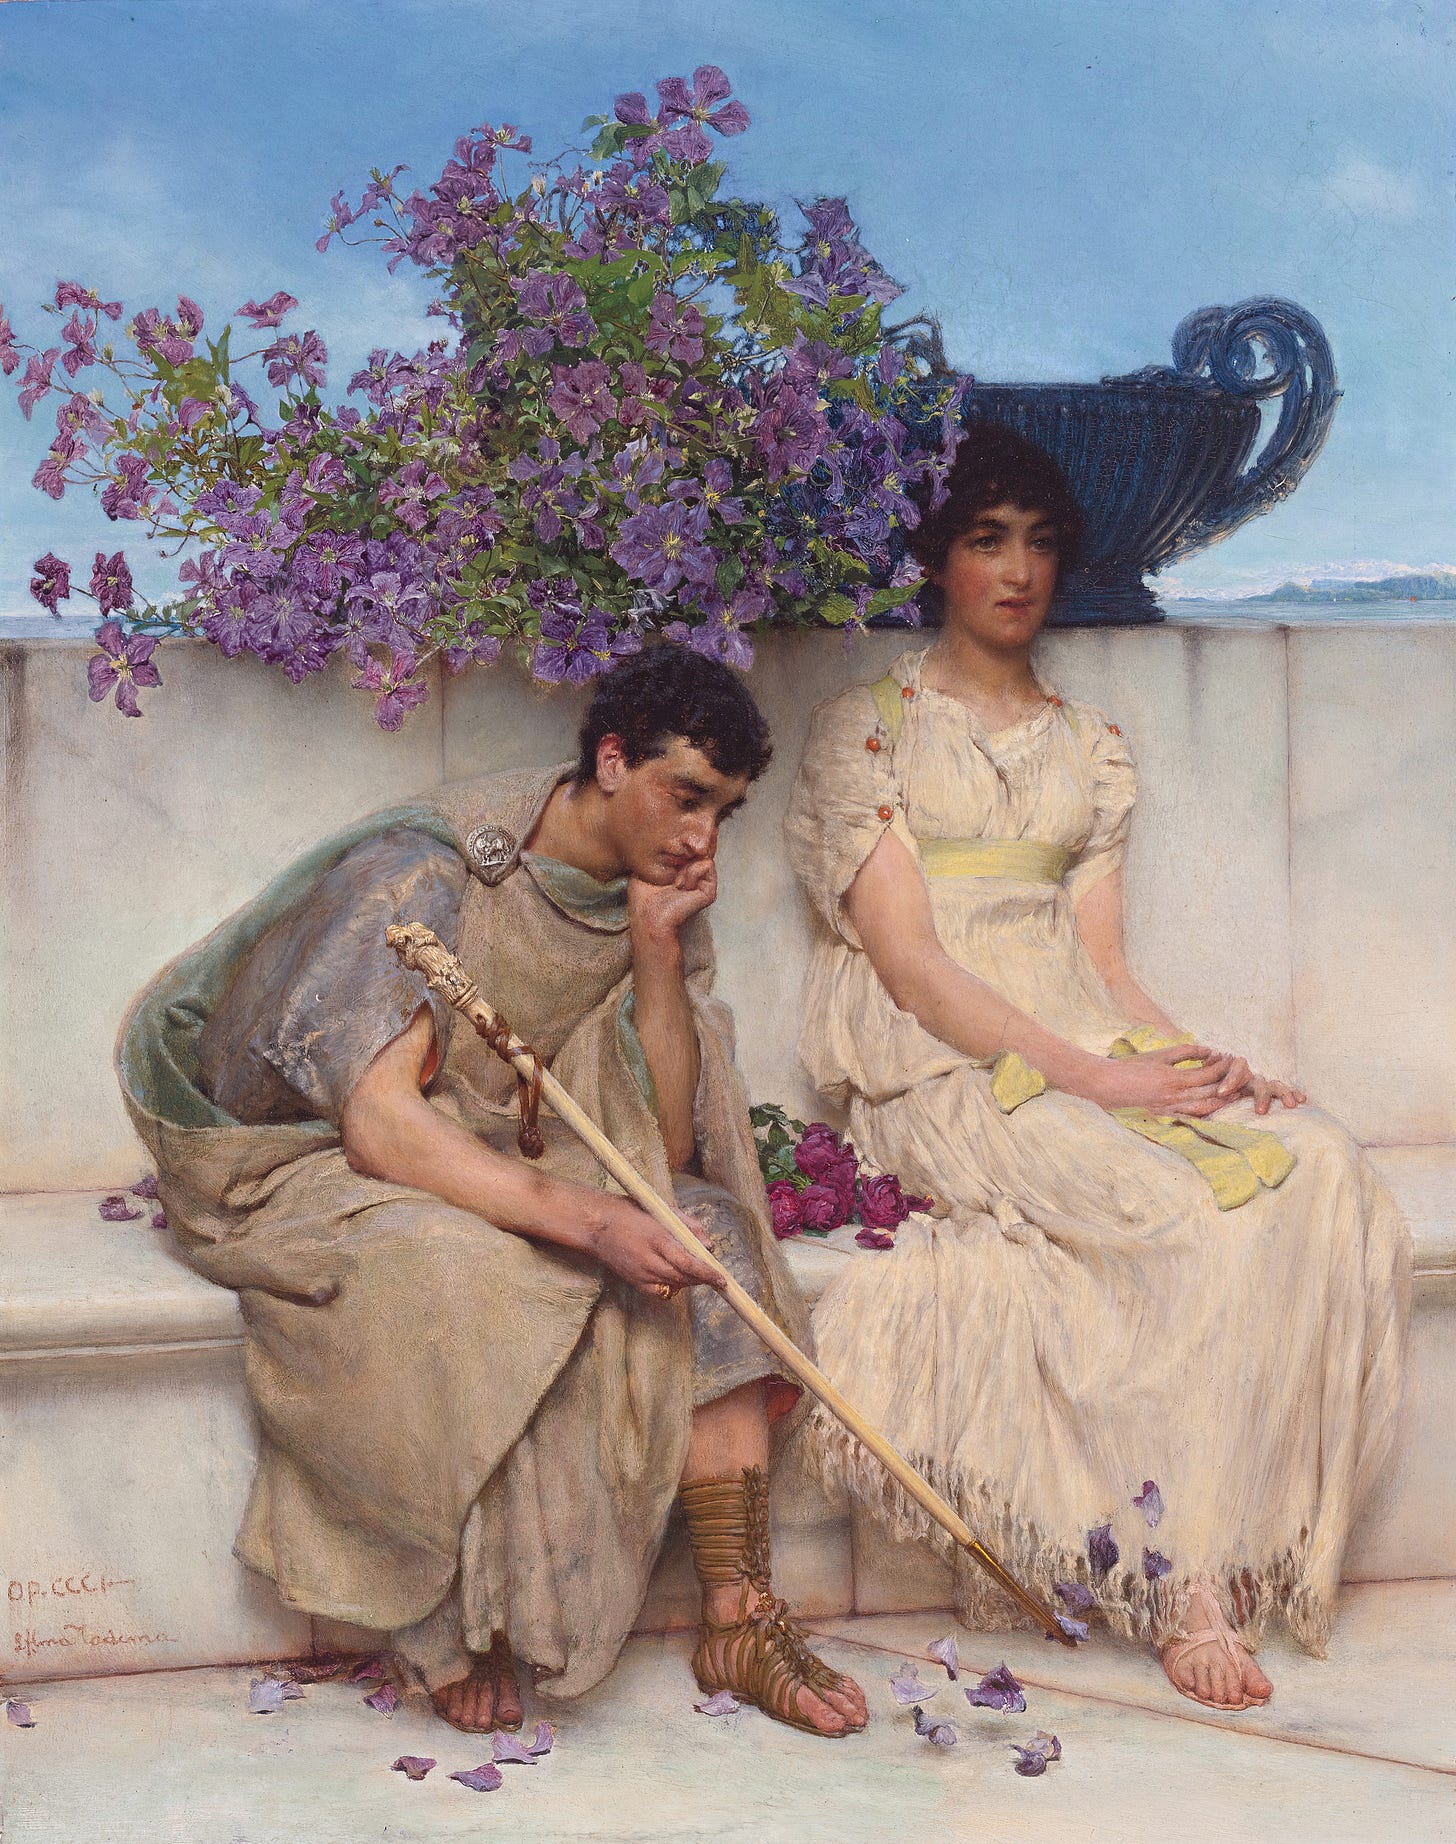 An Eloquent Silence by Lawrence Alma-Tadema | Obelisk Art History